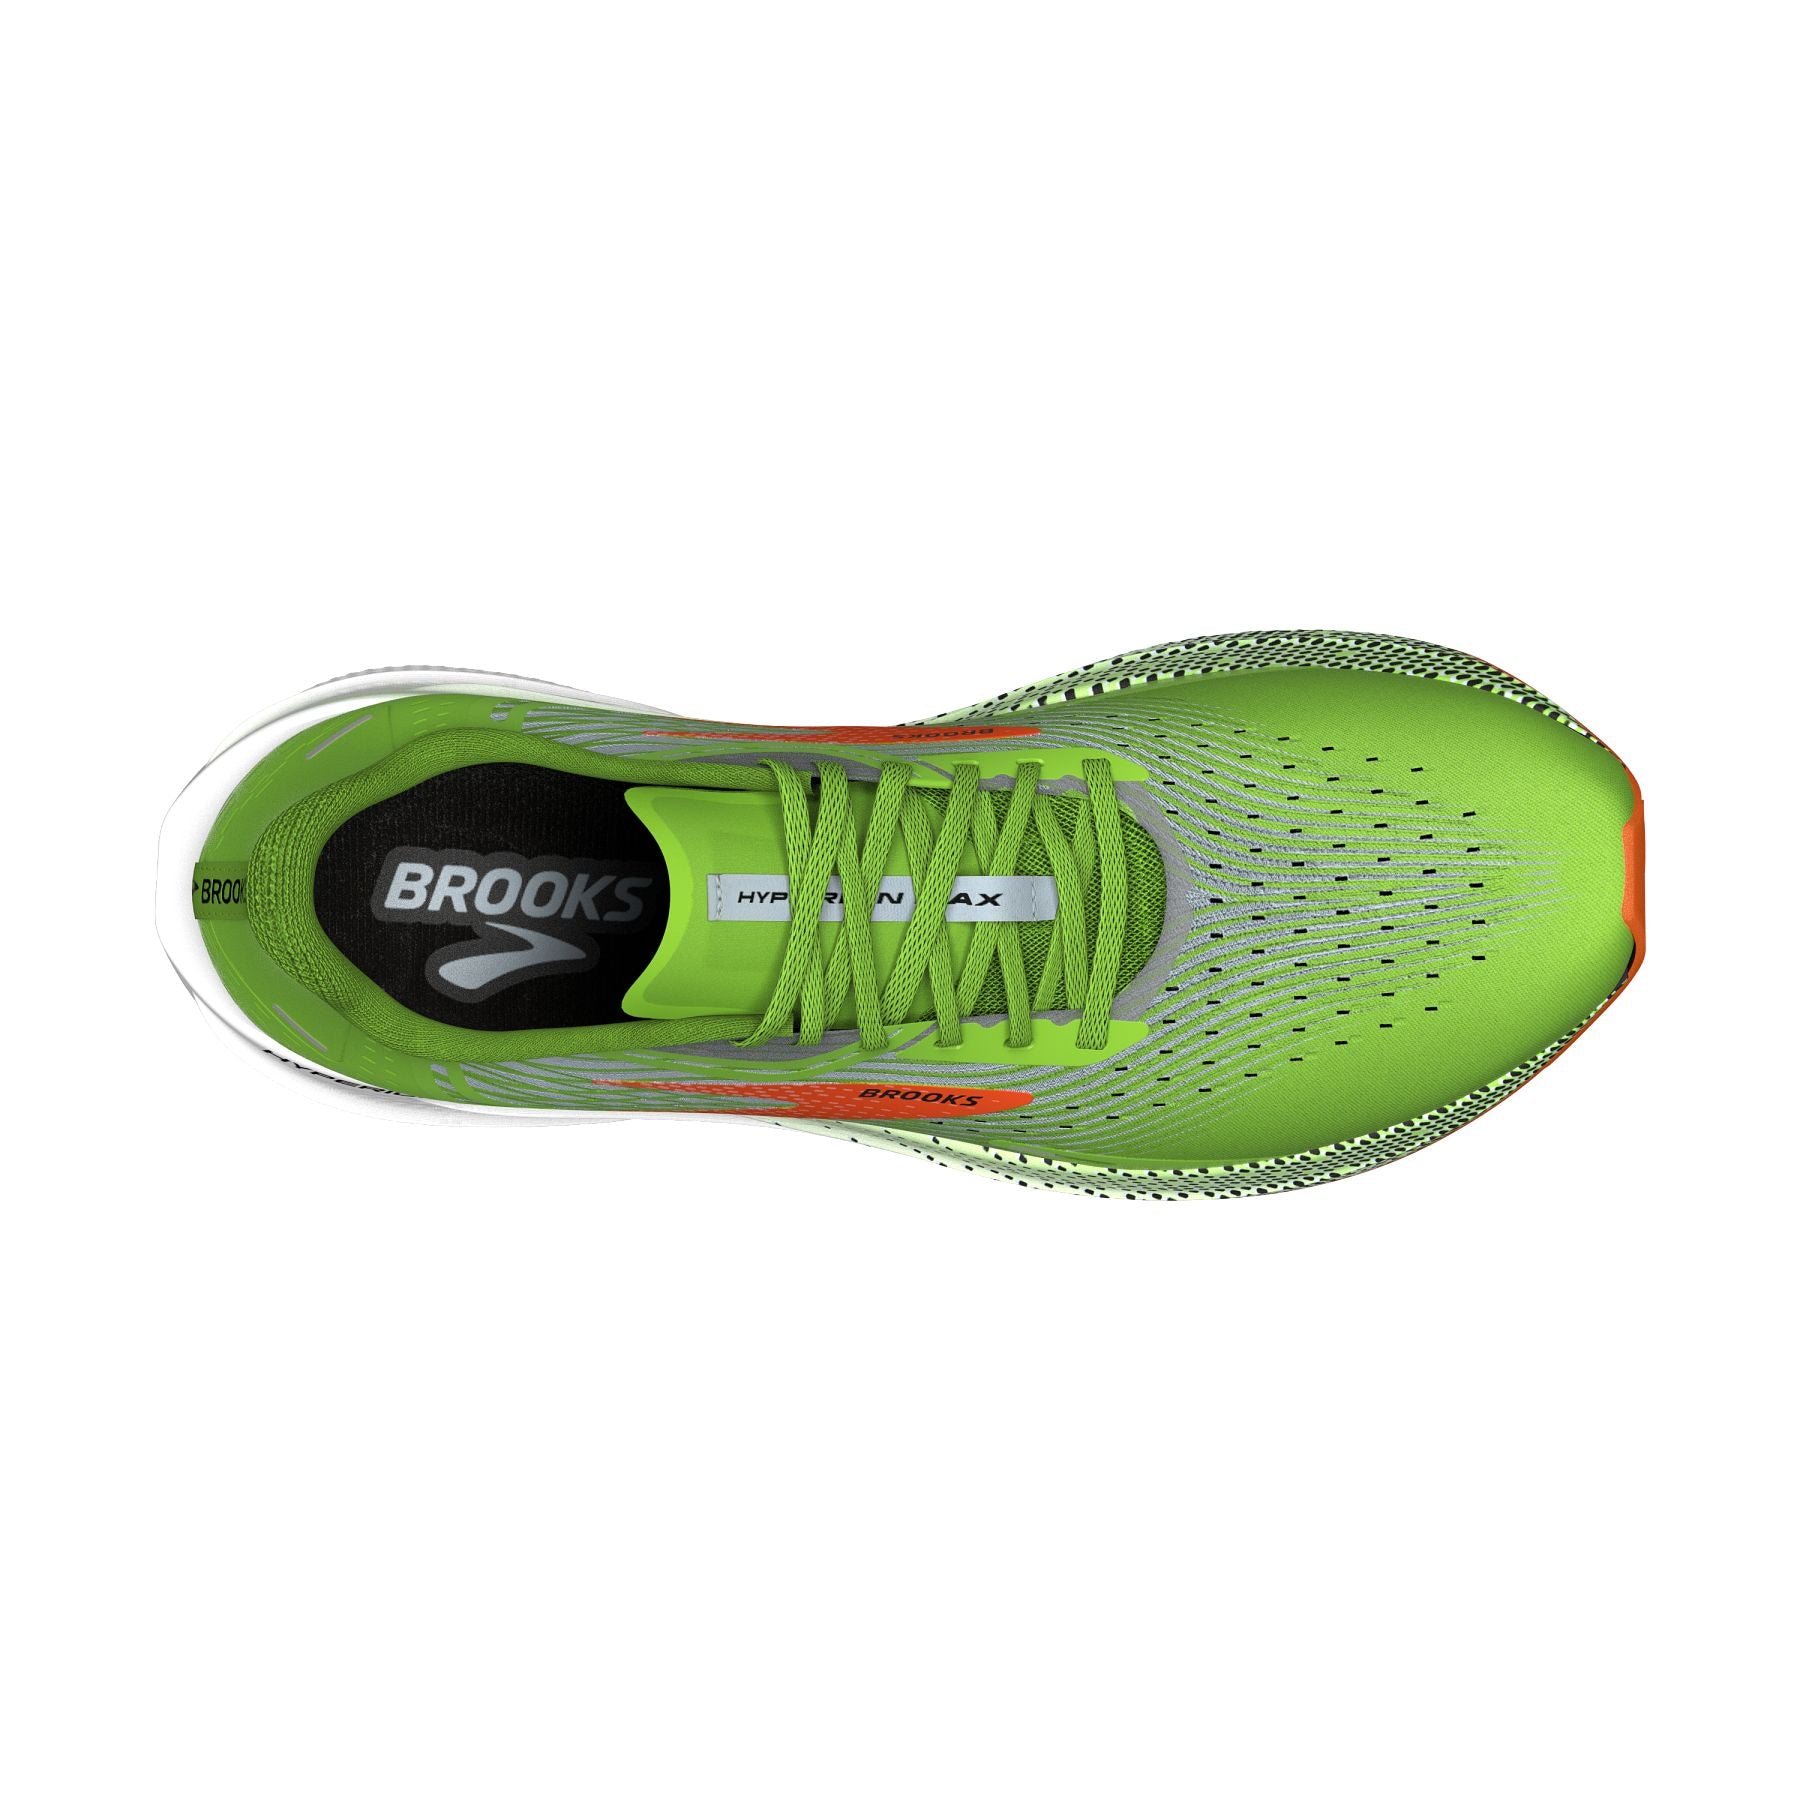 Top view of the Men's Hyperion Max in Green Gecko/Red Orange/White